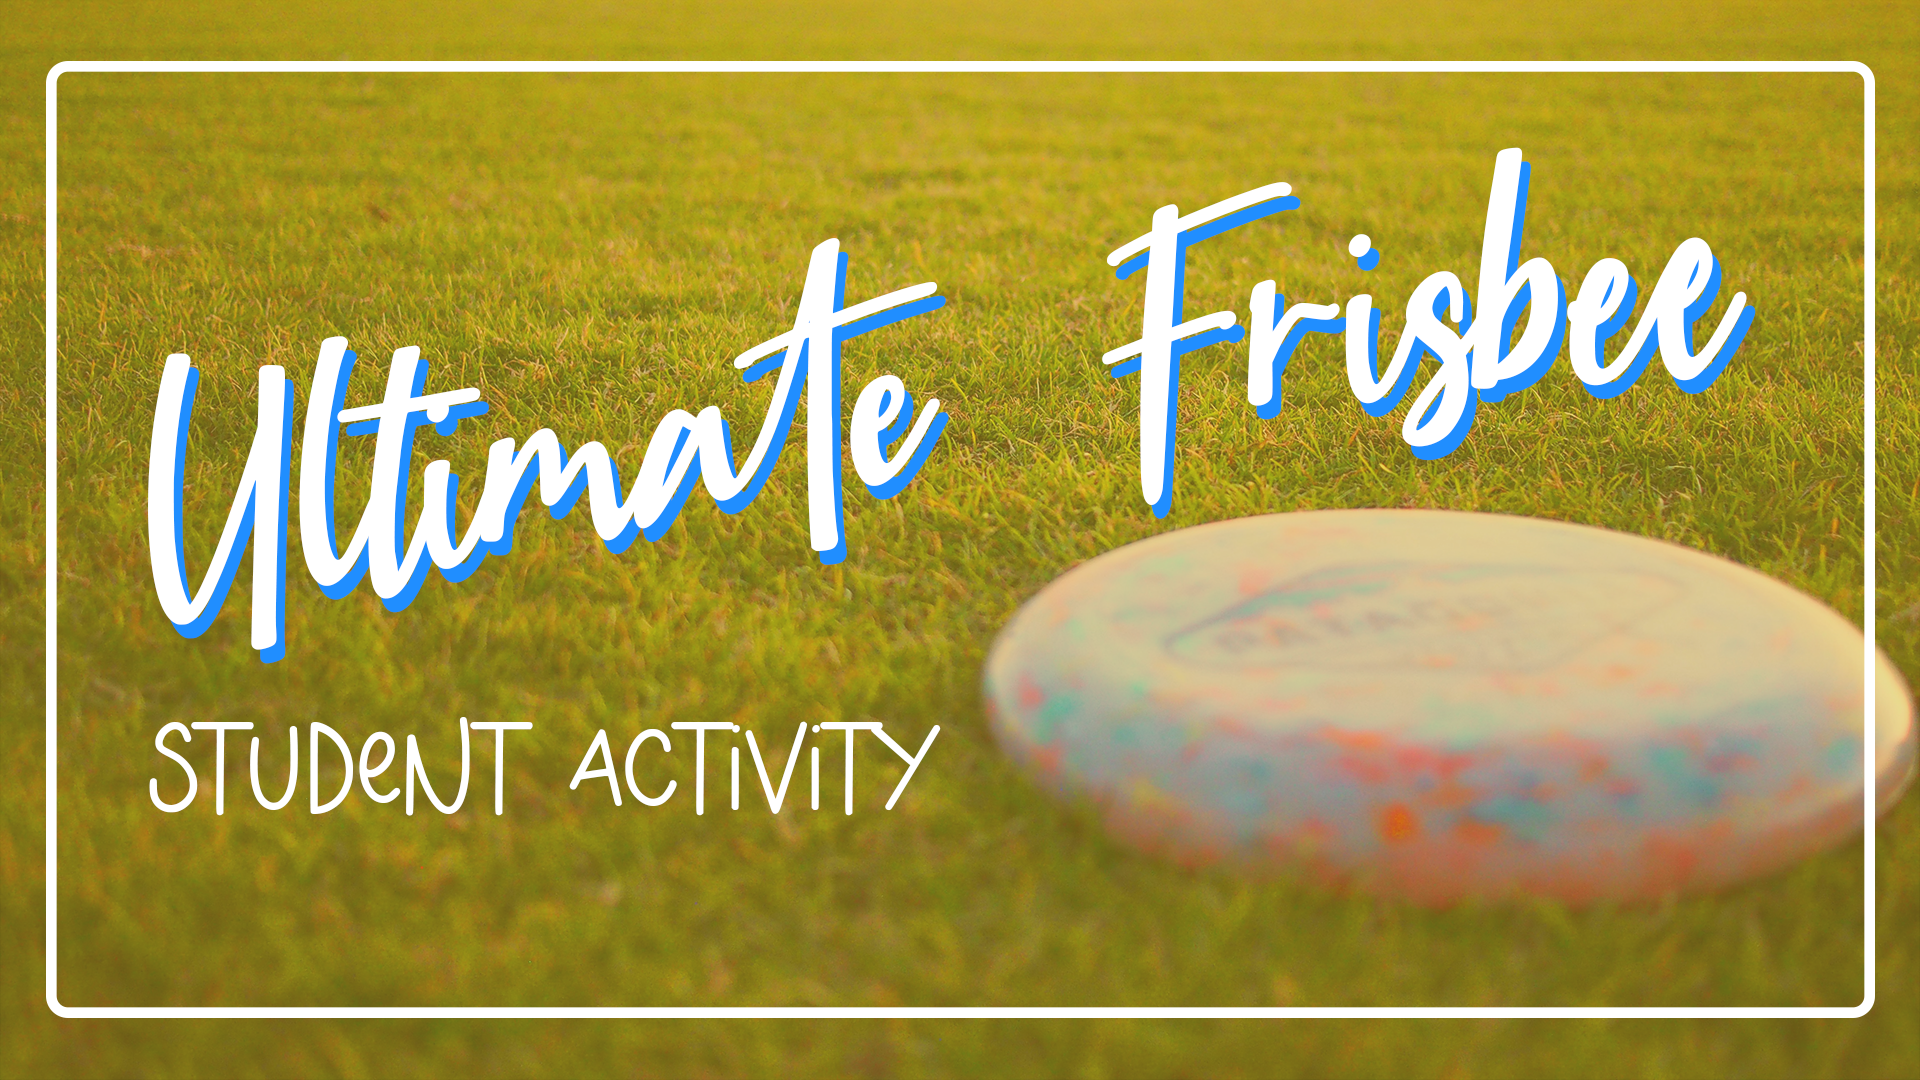 Student Activity: Ultimate Frisbee